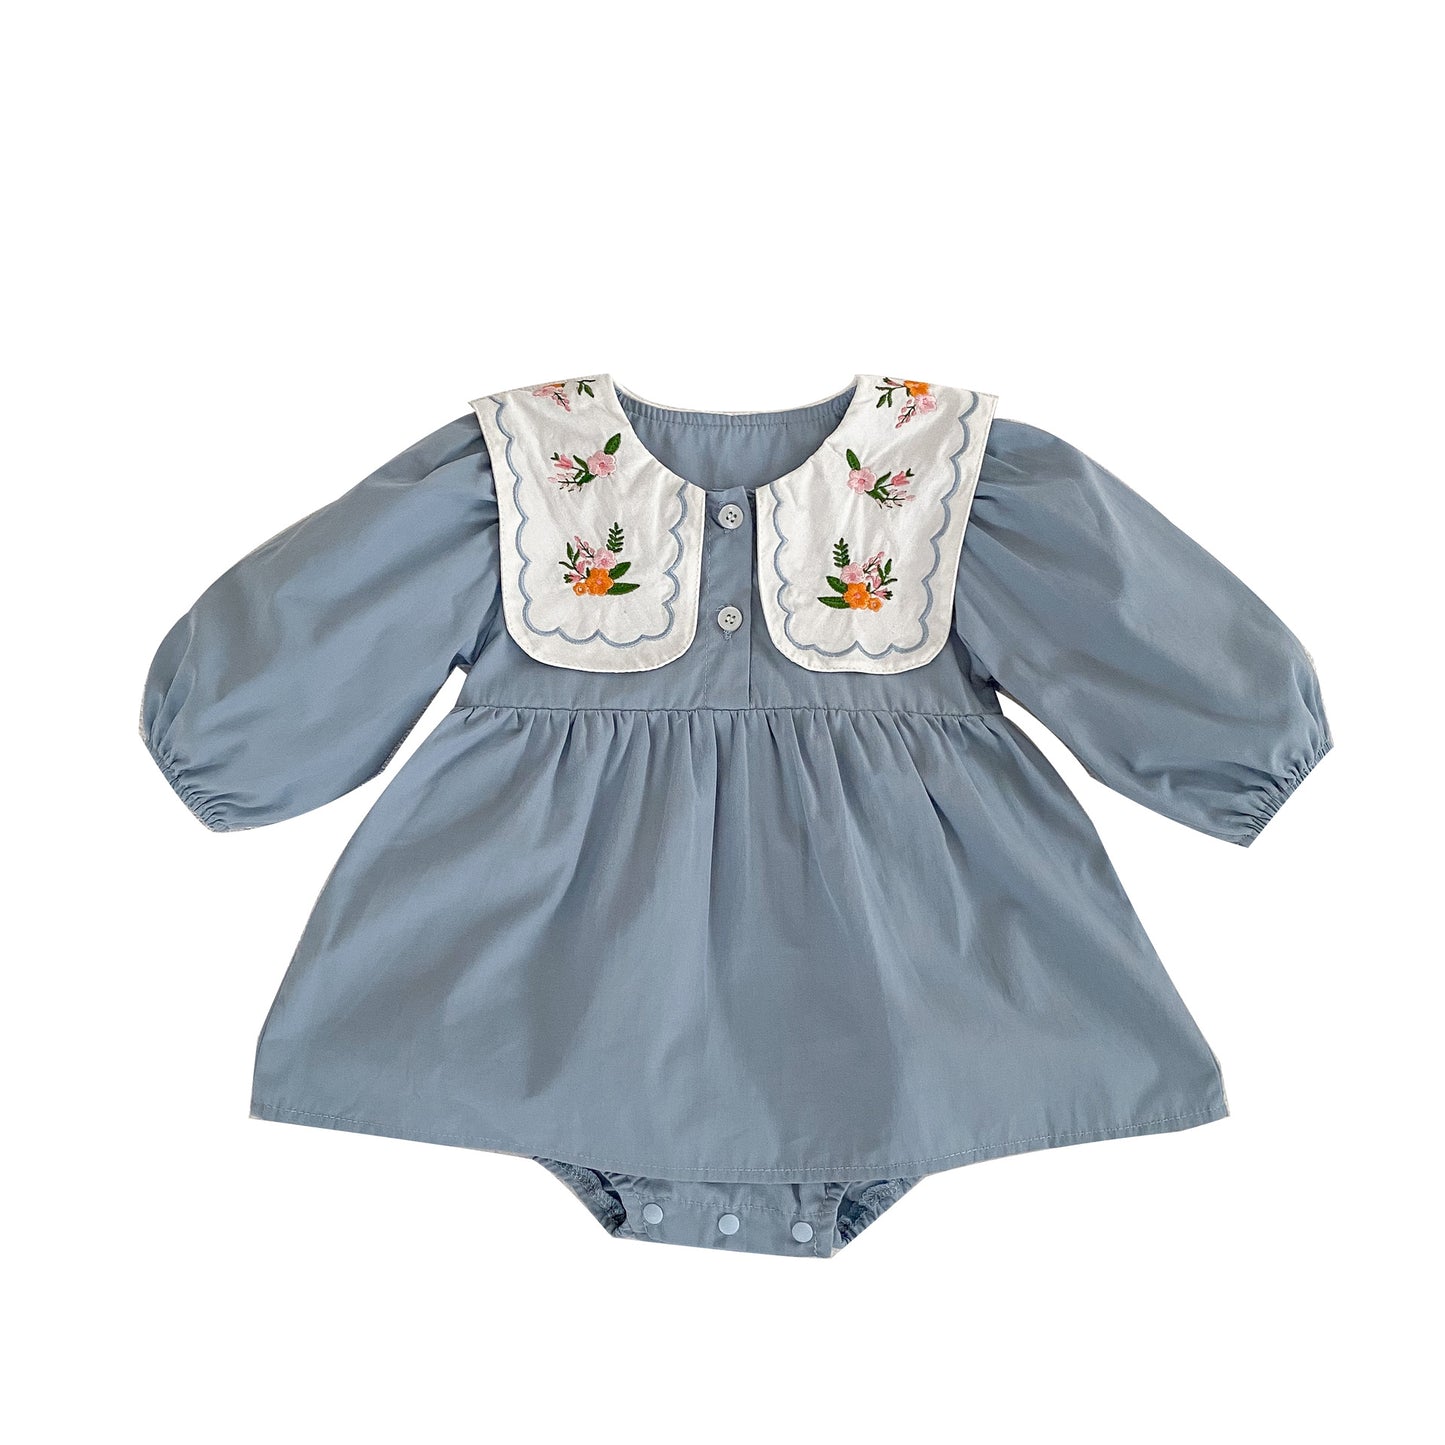 New Arrival Baby Floral Plain Princess Onesie Dress For Girls